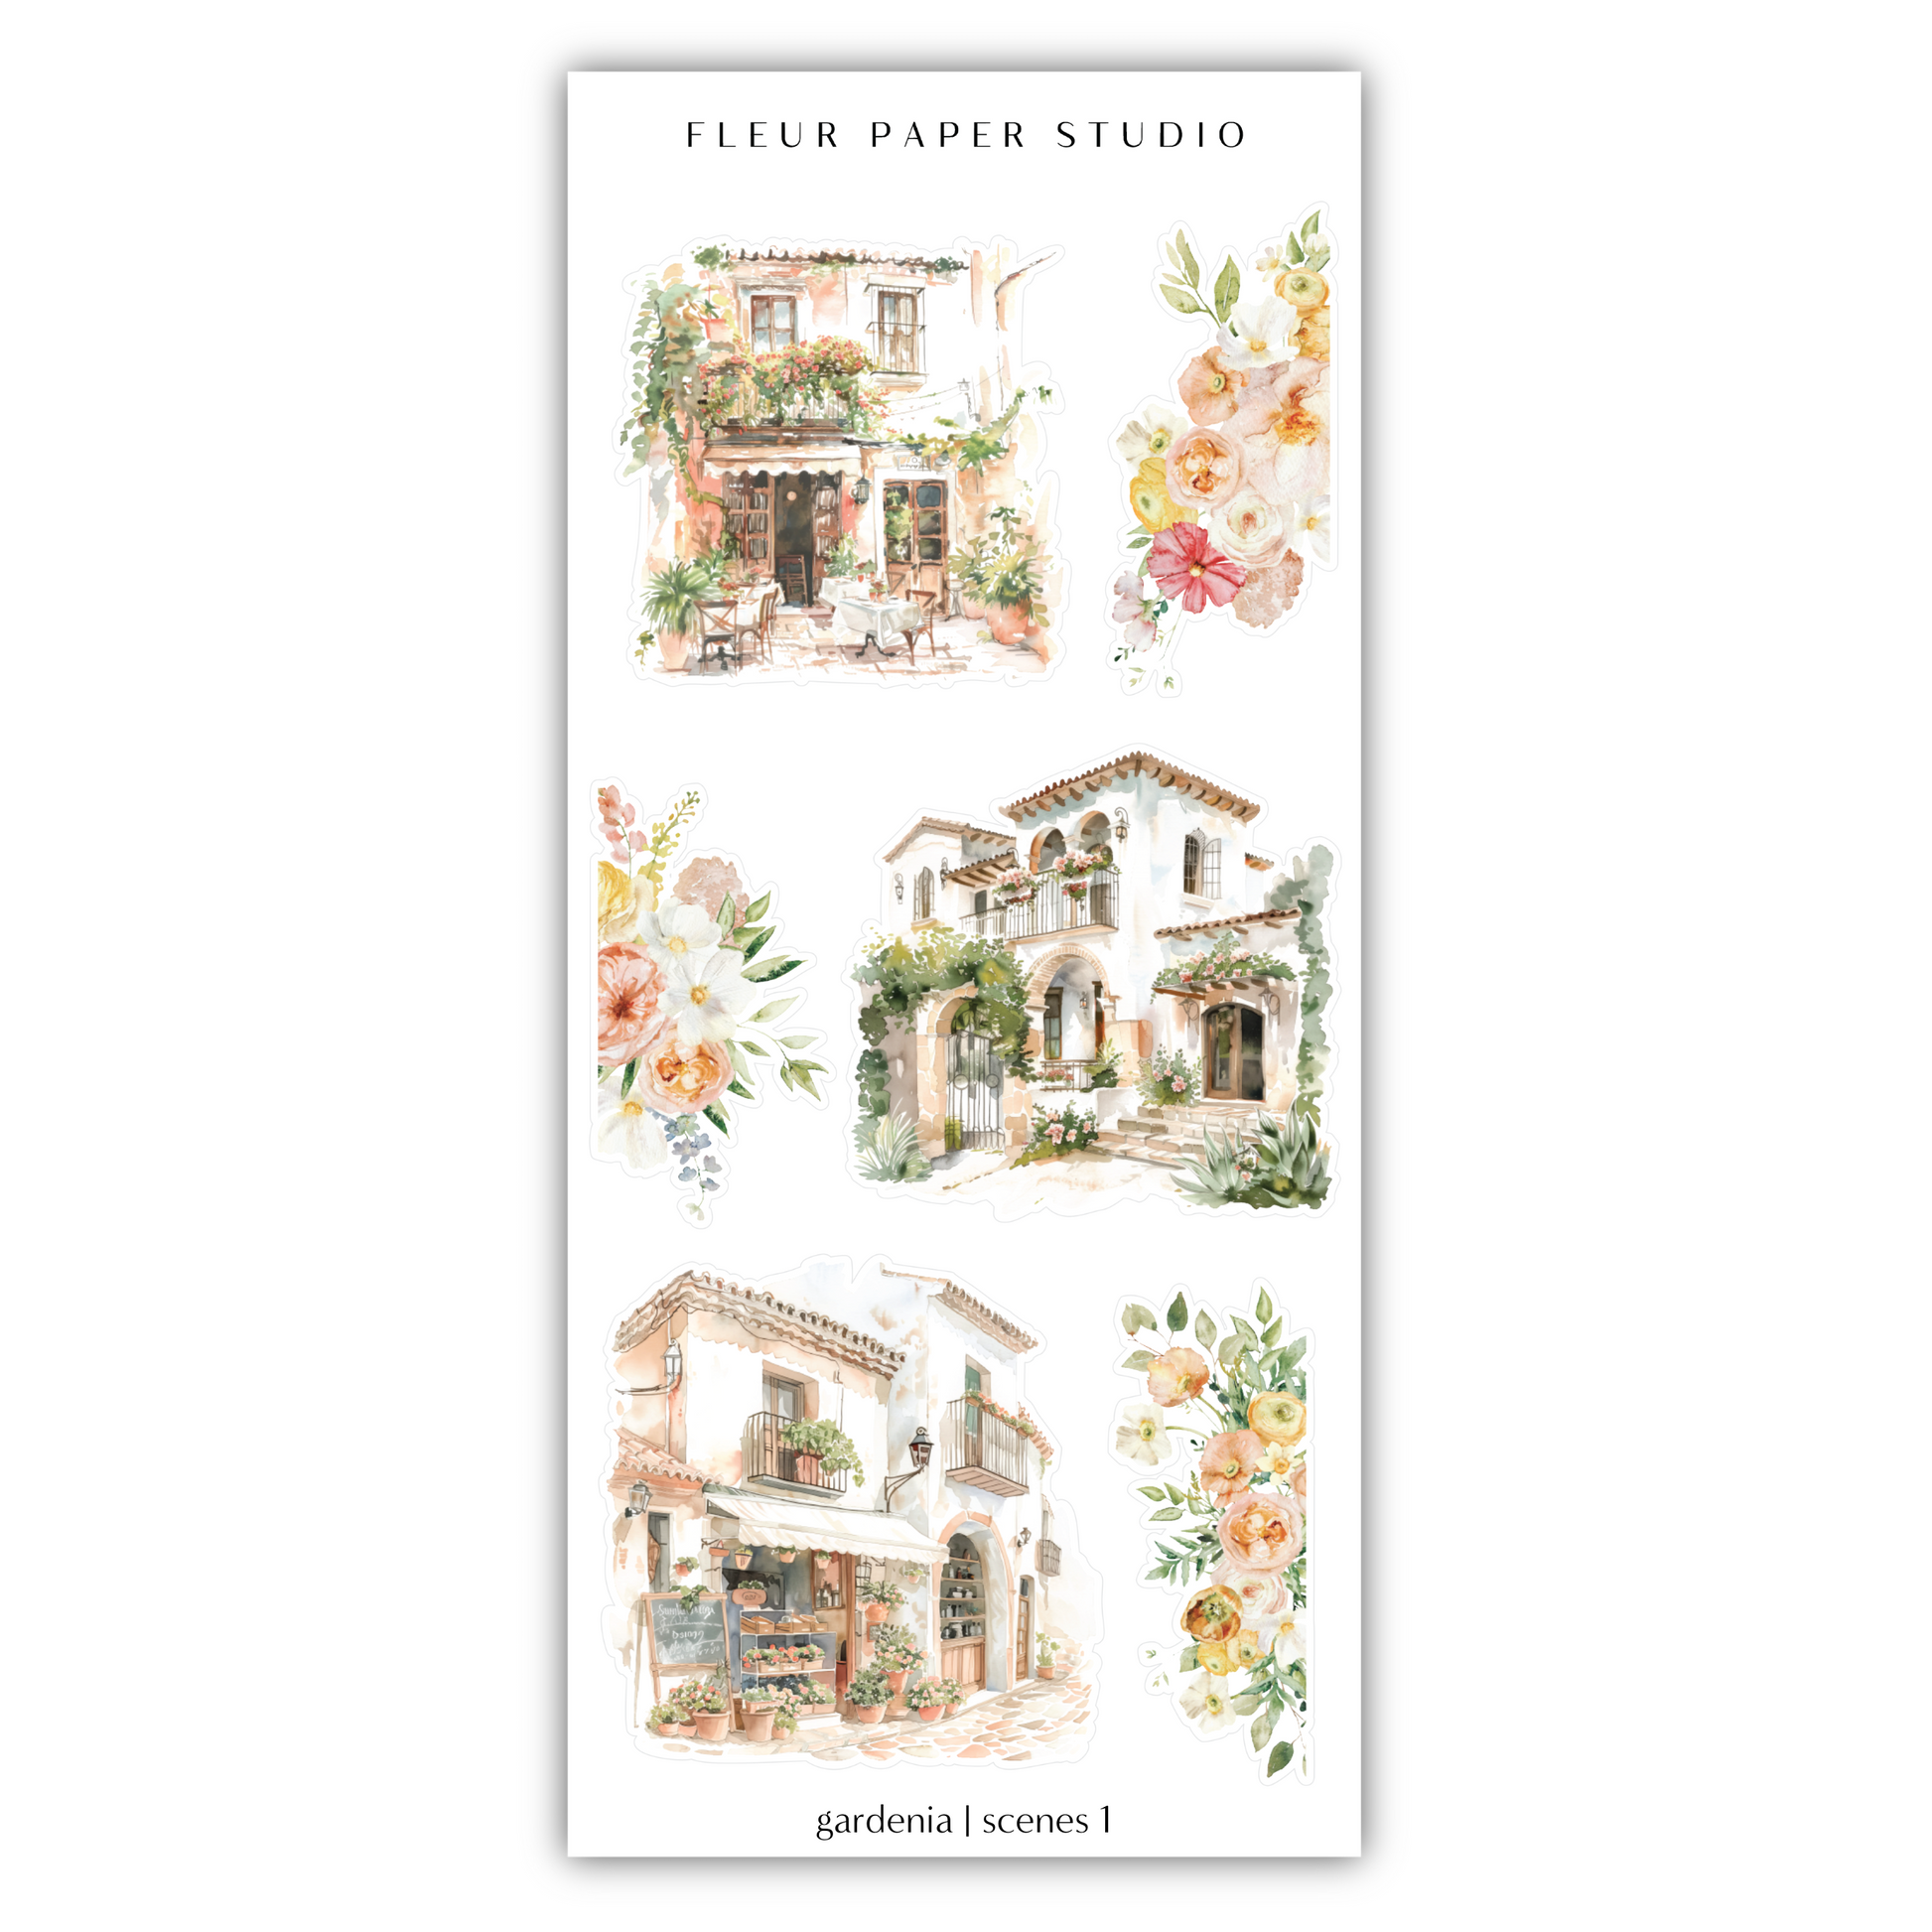 a sticker of a house with flowers on it